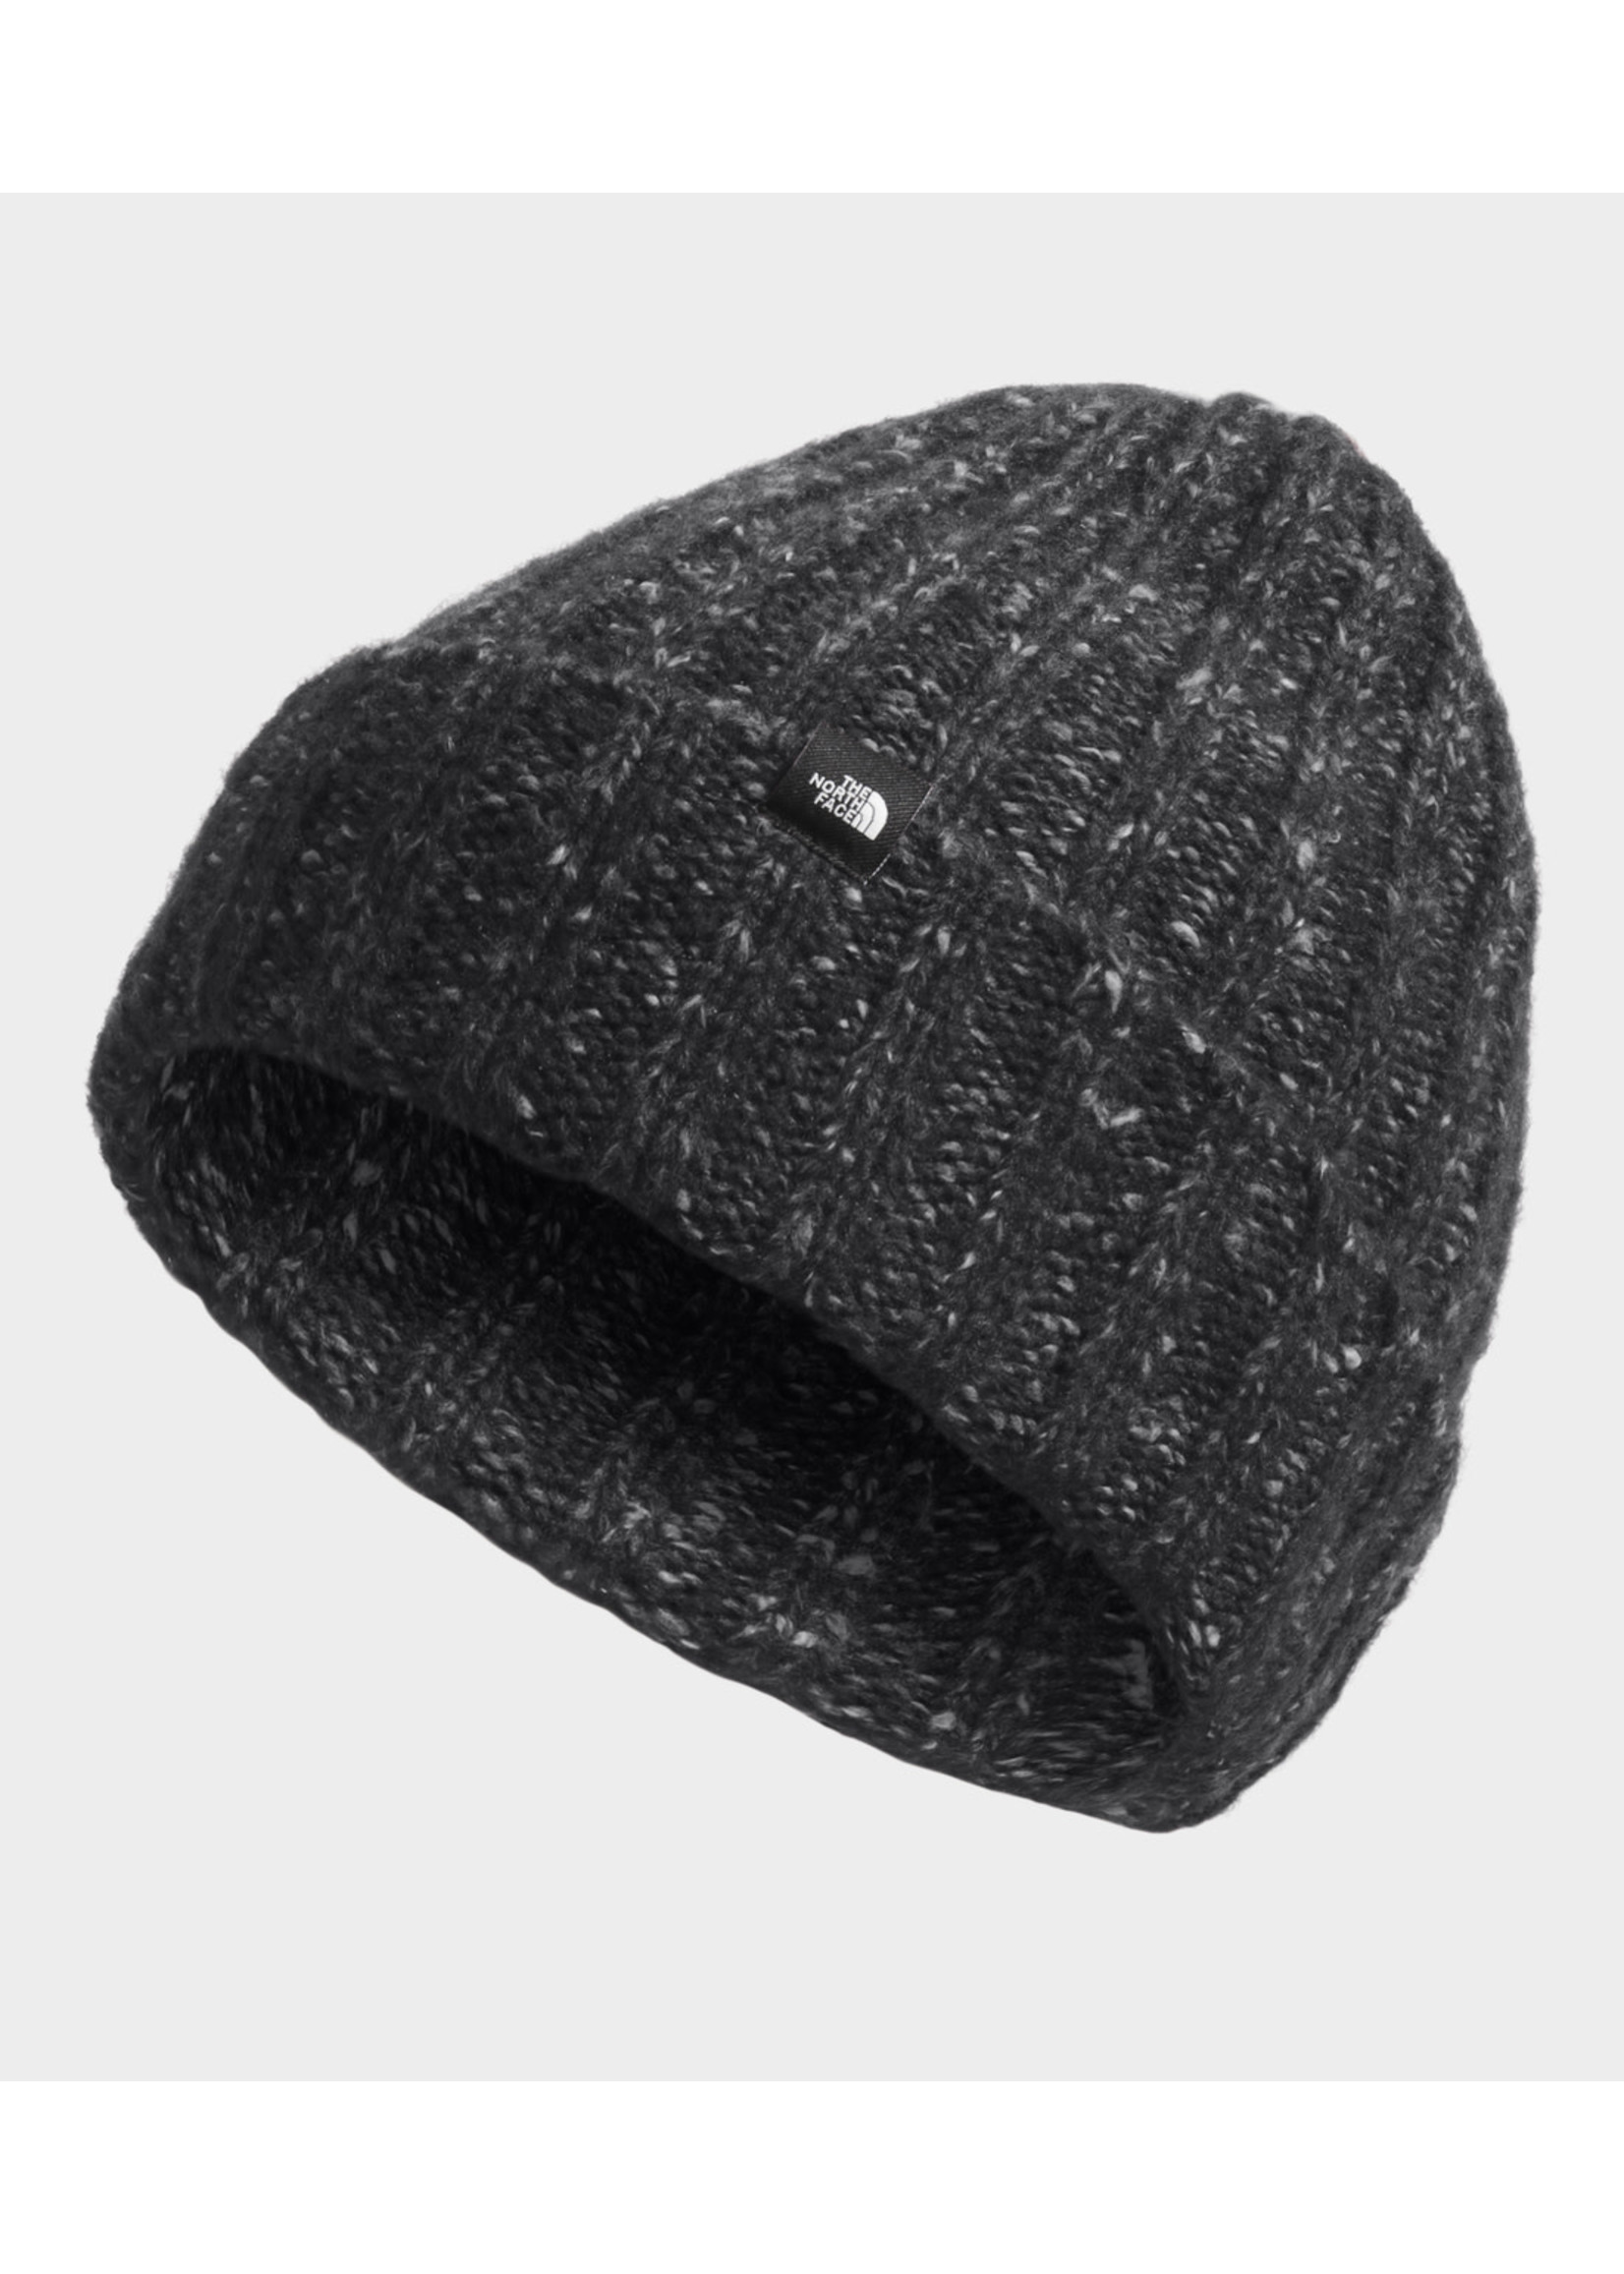 THE NORTH FACE Tuque Chunky Rib